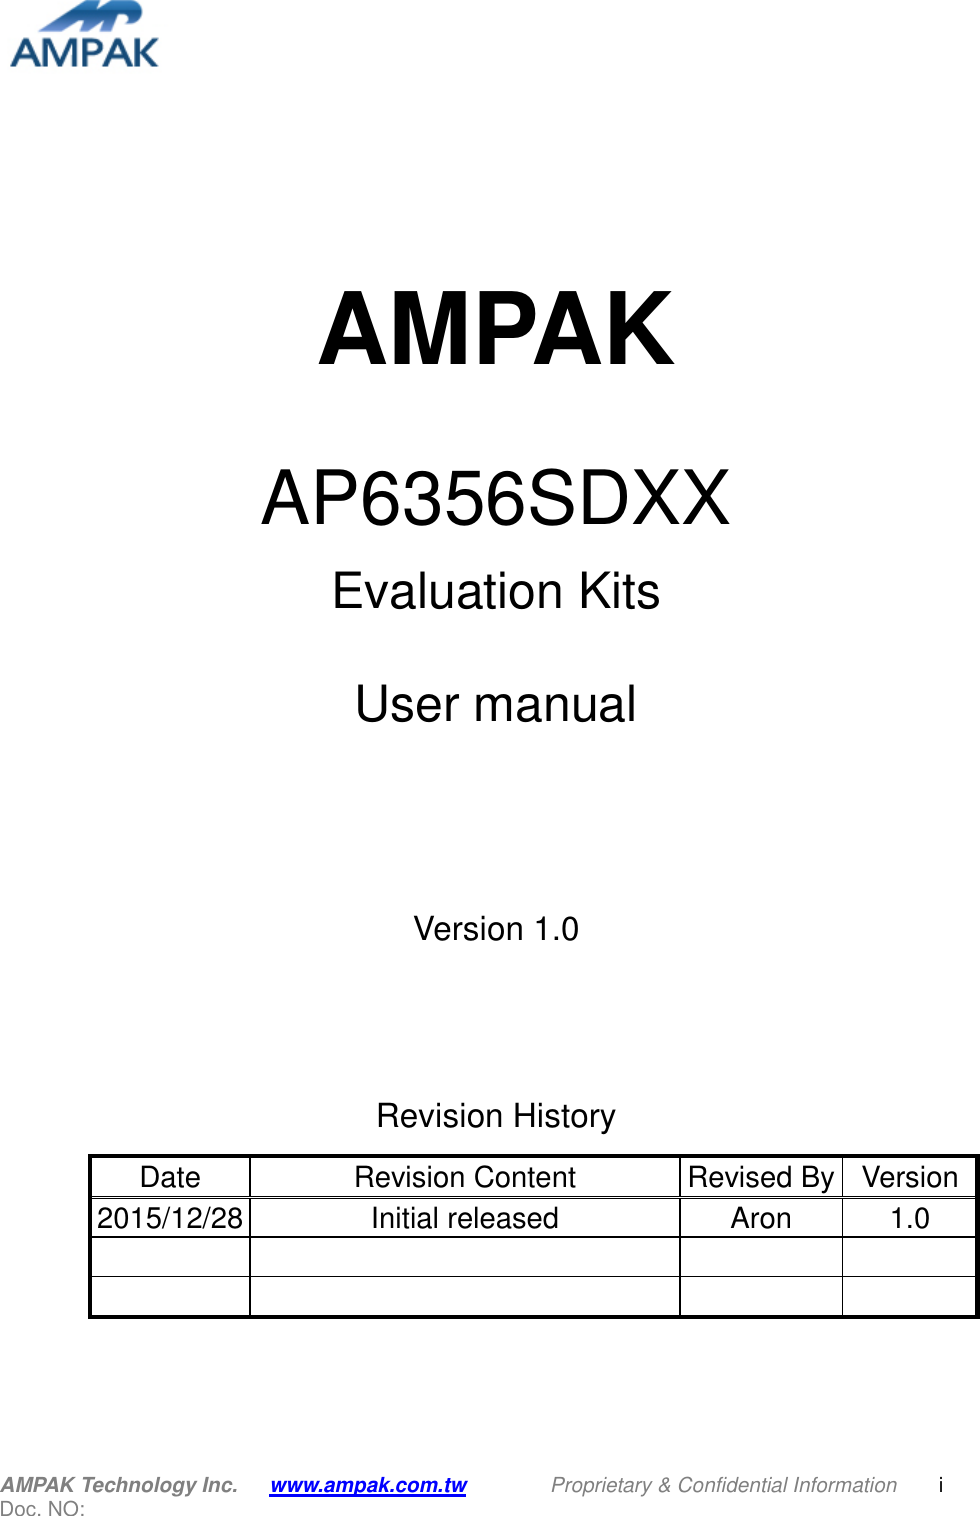  AMPAK Technology Inc.   www.ampak.com.tw                Proprietary &amp; Confidential Information    i Doc. NO:          AMPAK  AP6356SDXX Evaluation Kits  User manual   Version 1.0      Revision History Date Revision Content Revised By Version 2015/12/28 Initial released   Aron 1.0           